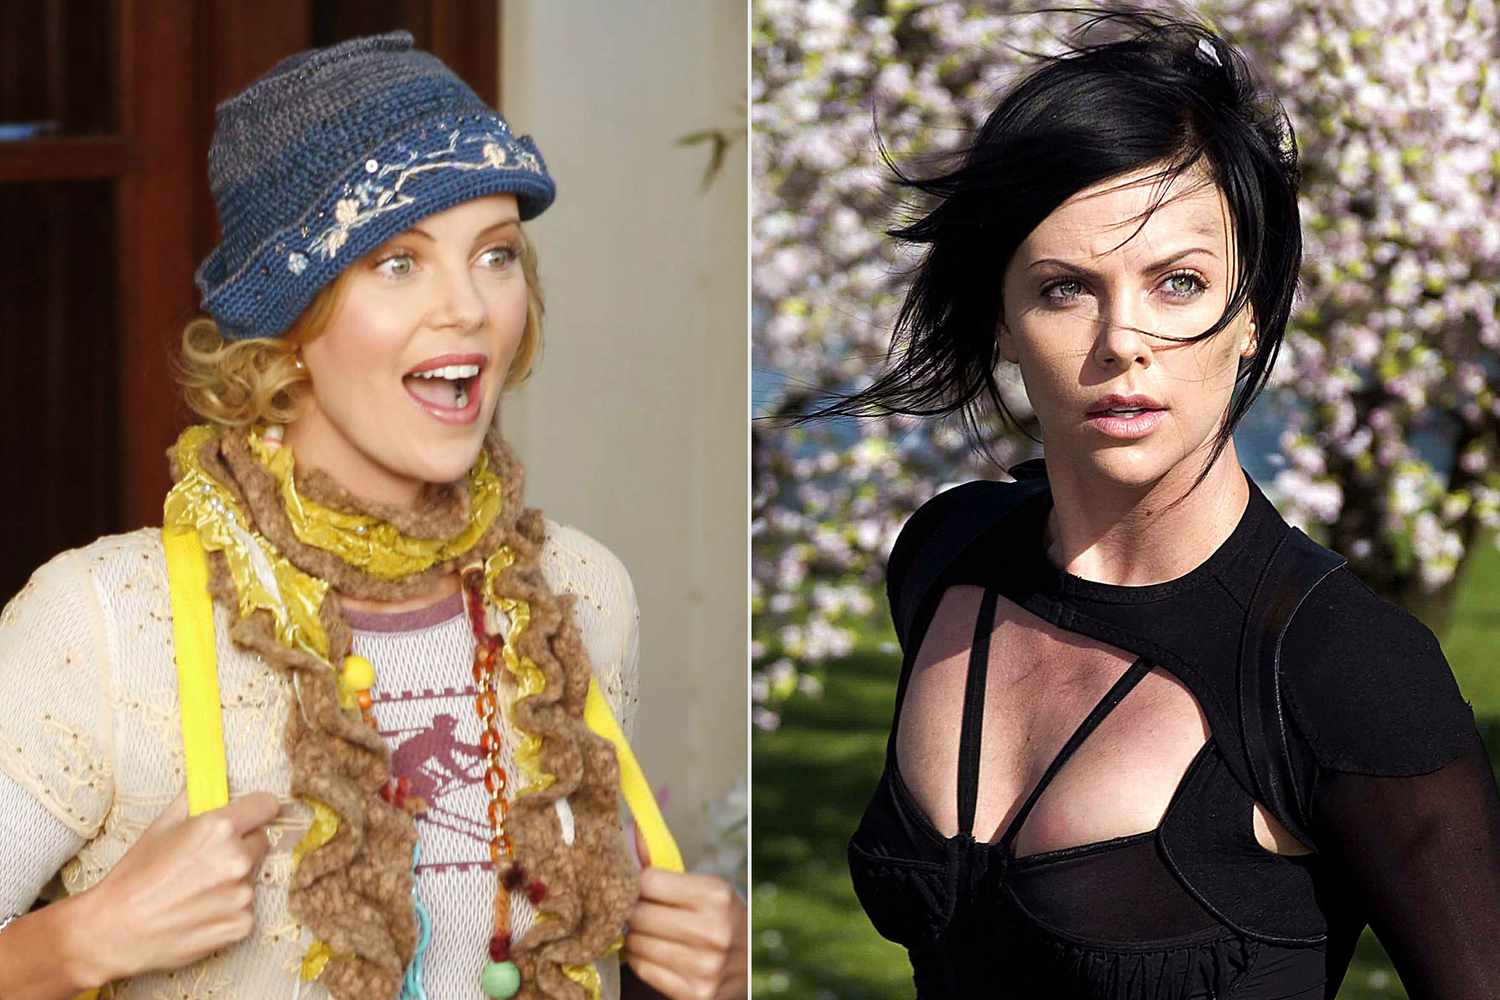 Charlize Theron joined Arrested Development after Aeon Flux flop